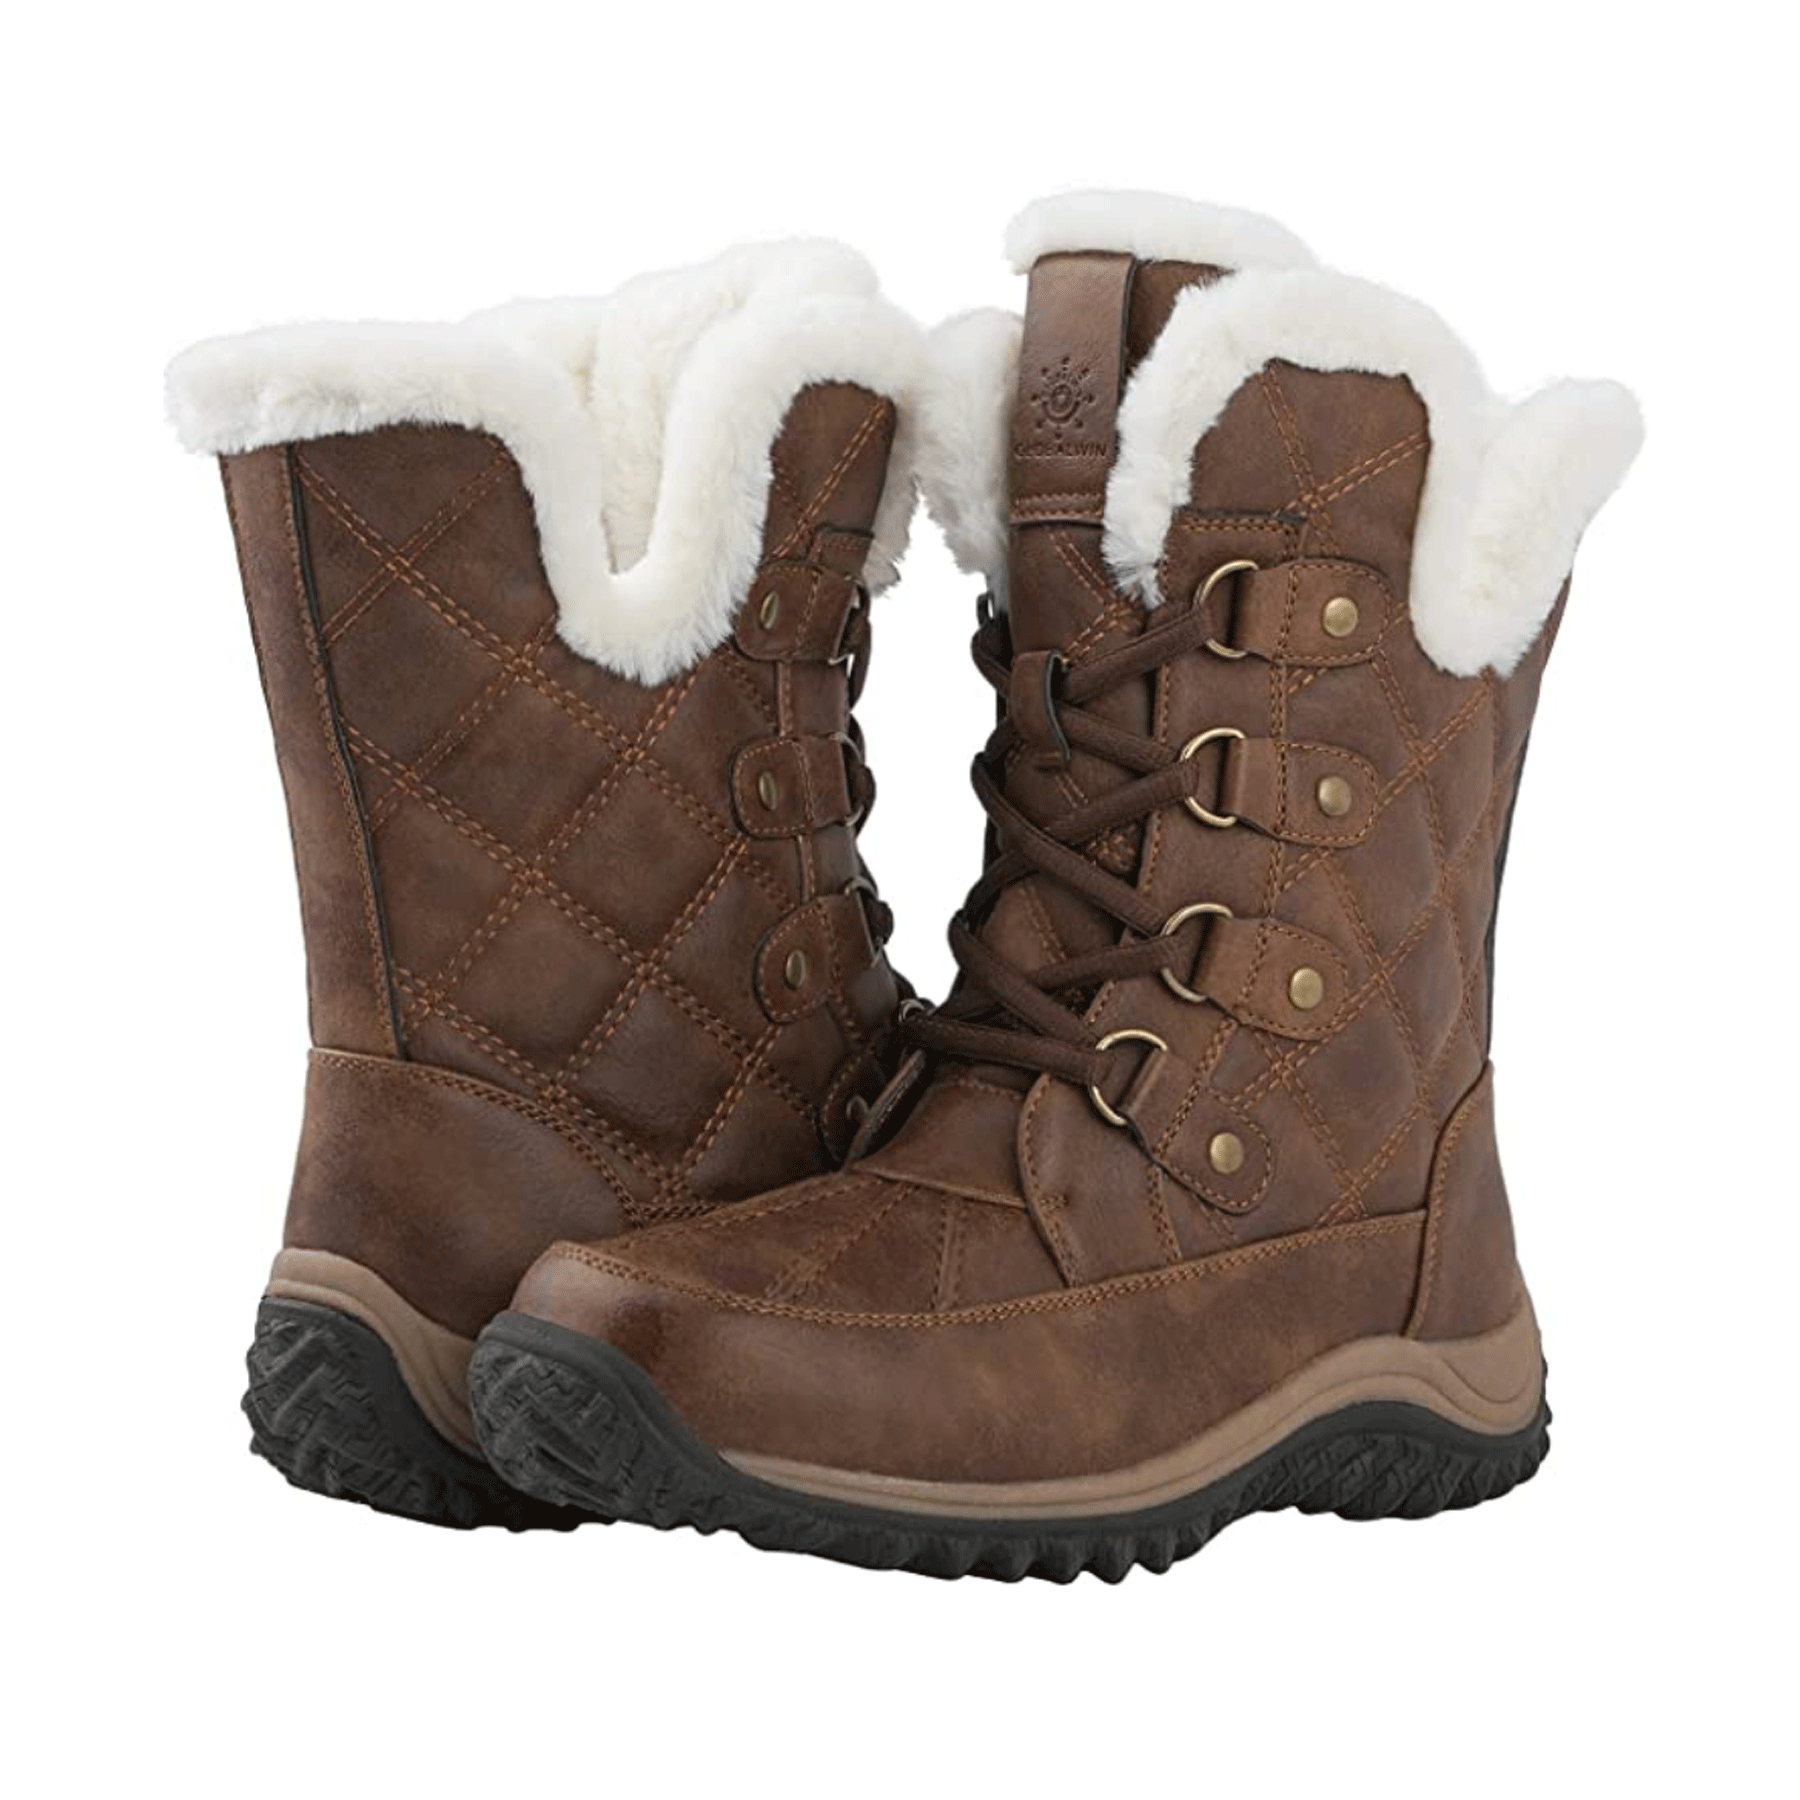 women’s-lace-up-winter-boots-1